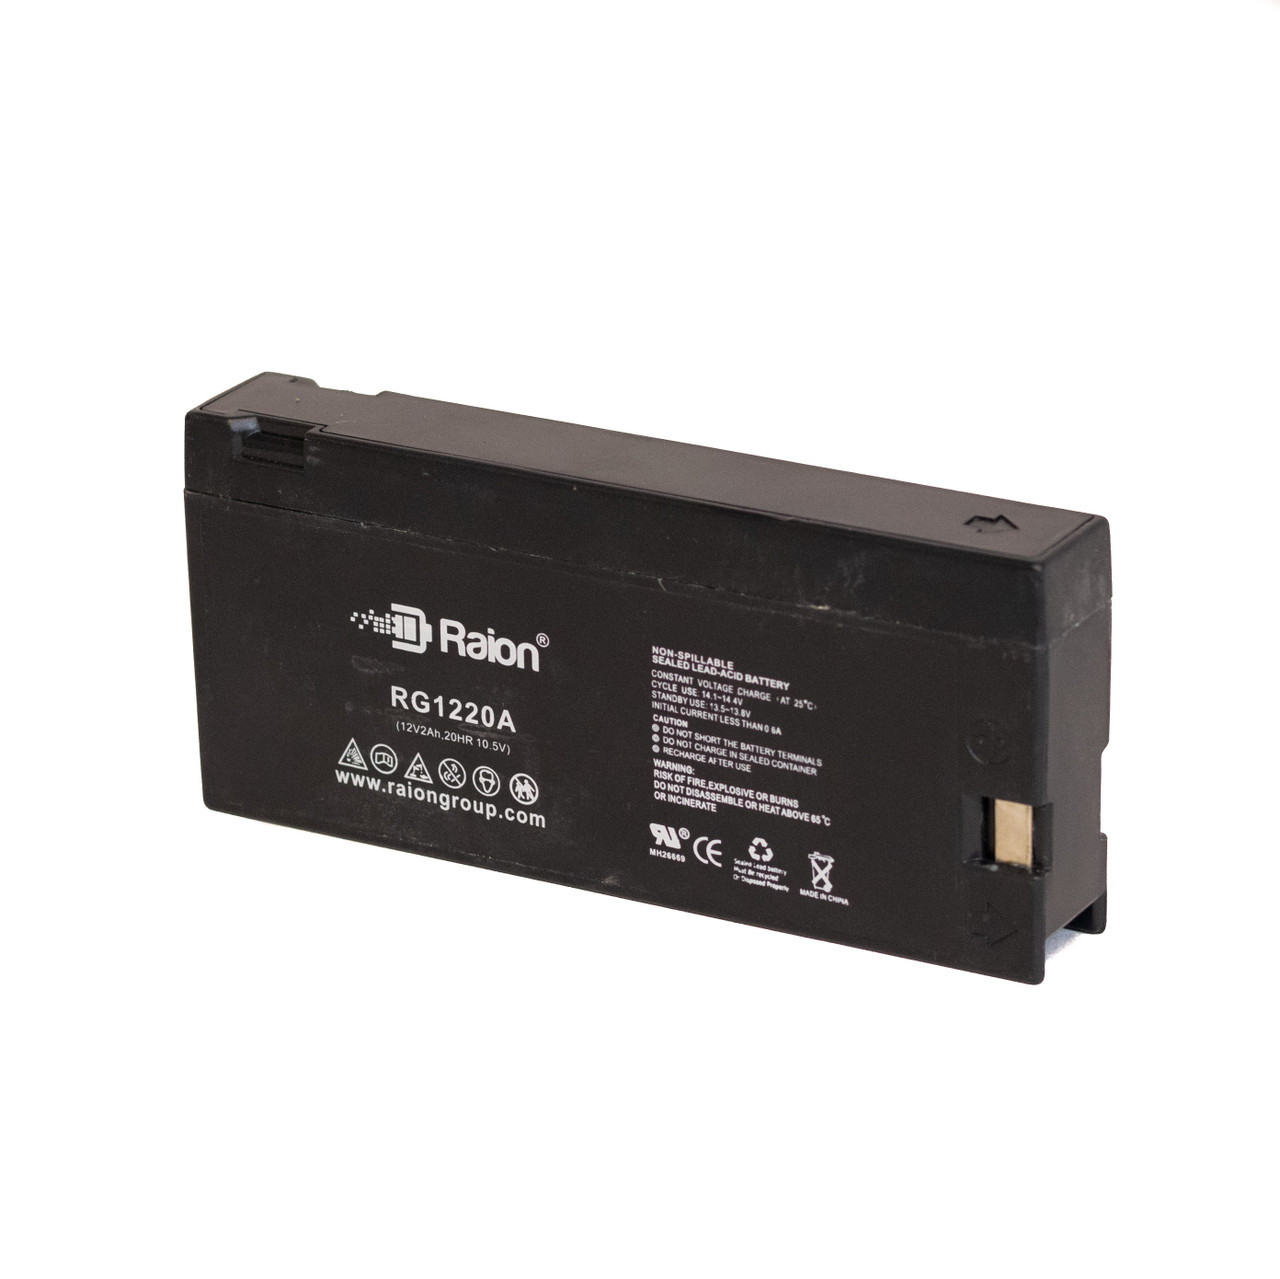 Raion Power RG1220A Replacement Battery for Sears 53684